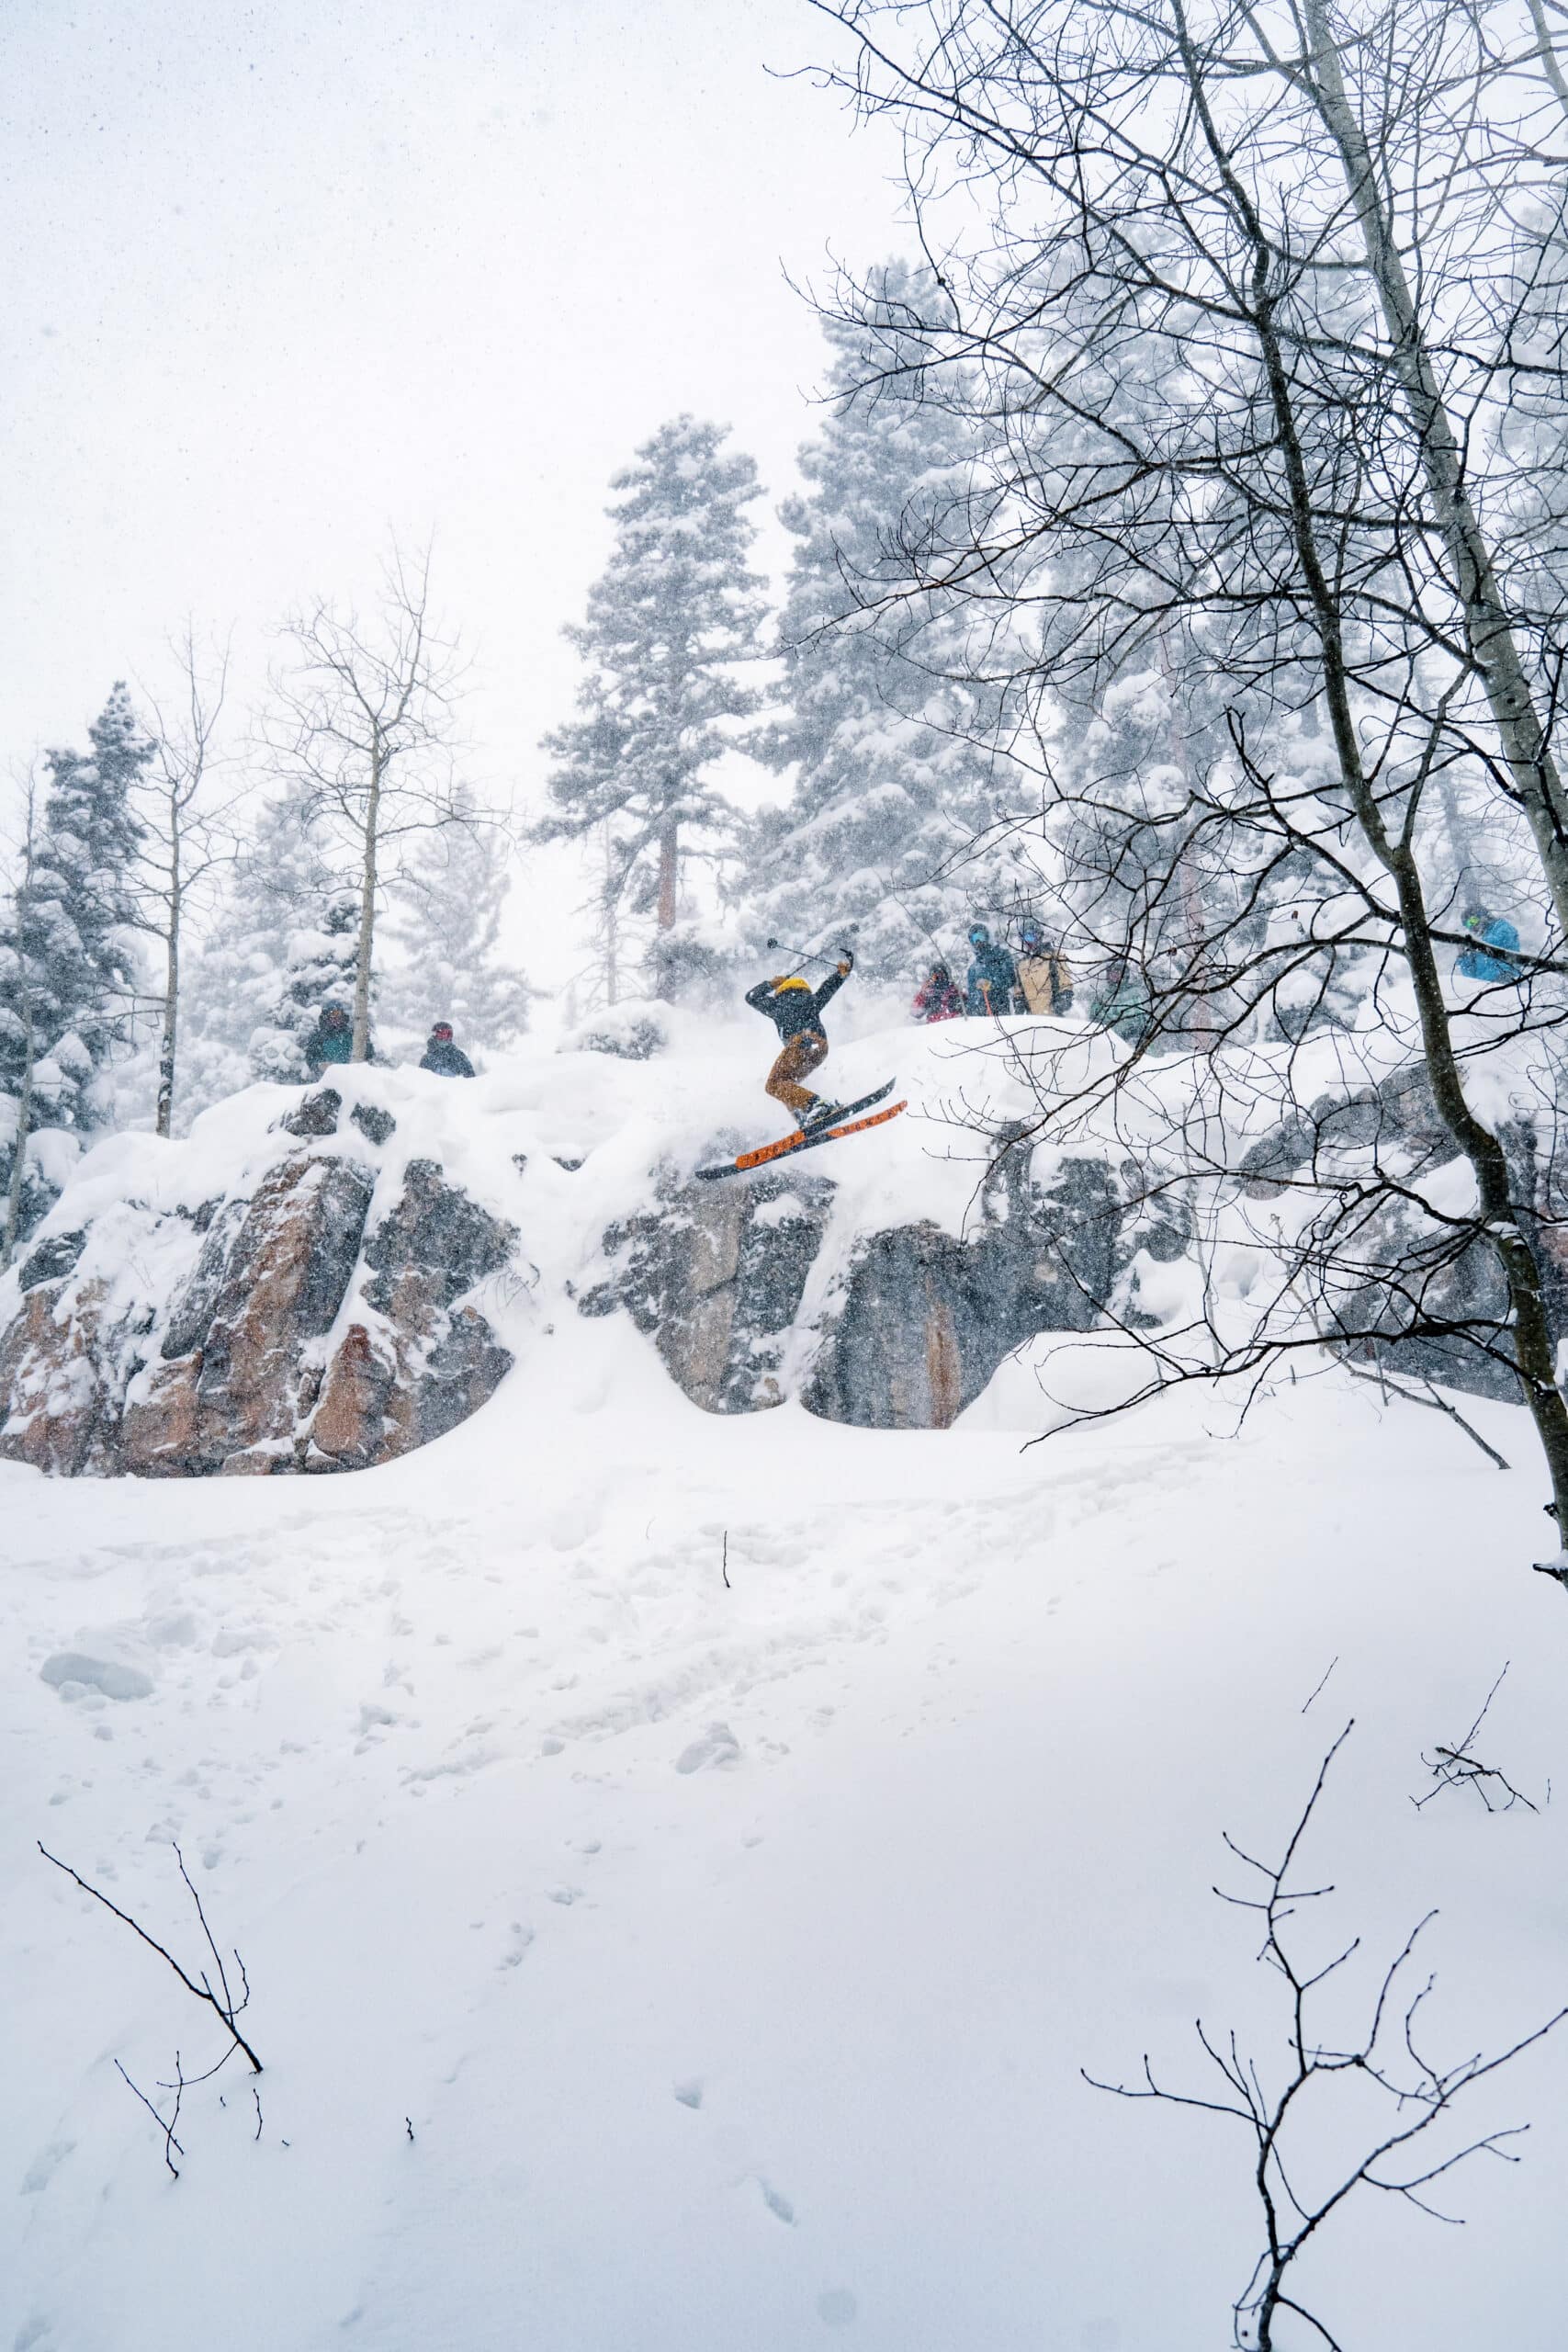 Skier dropping a cliff on a powder day